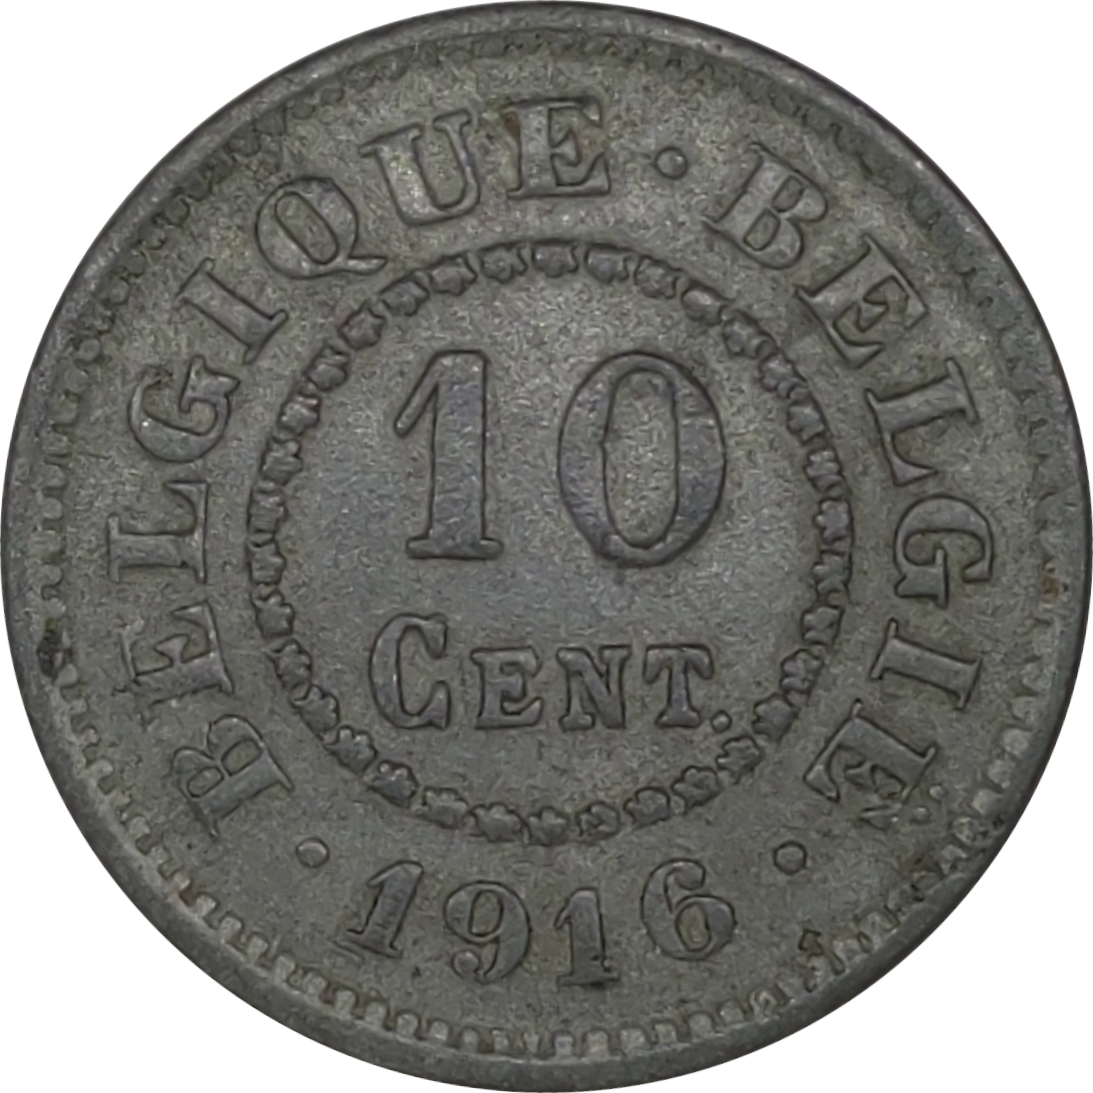 10 centimes - Occupation